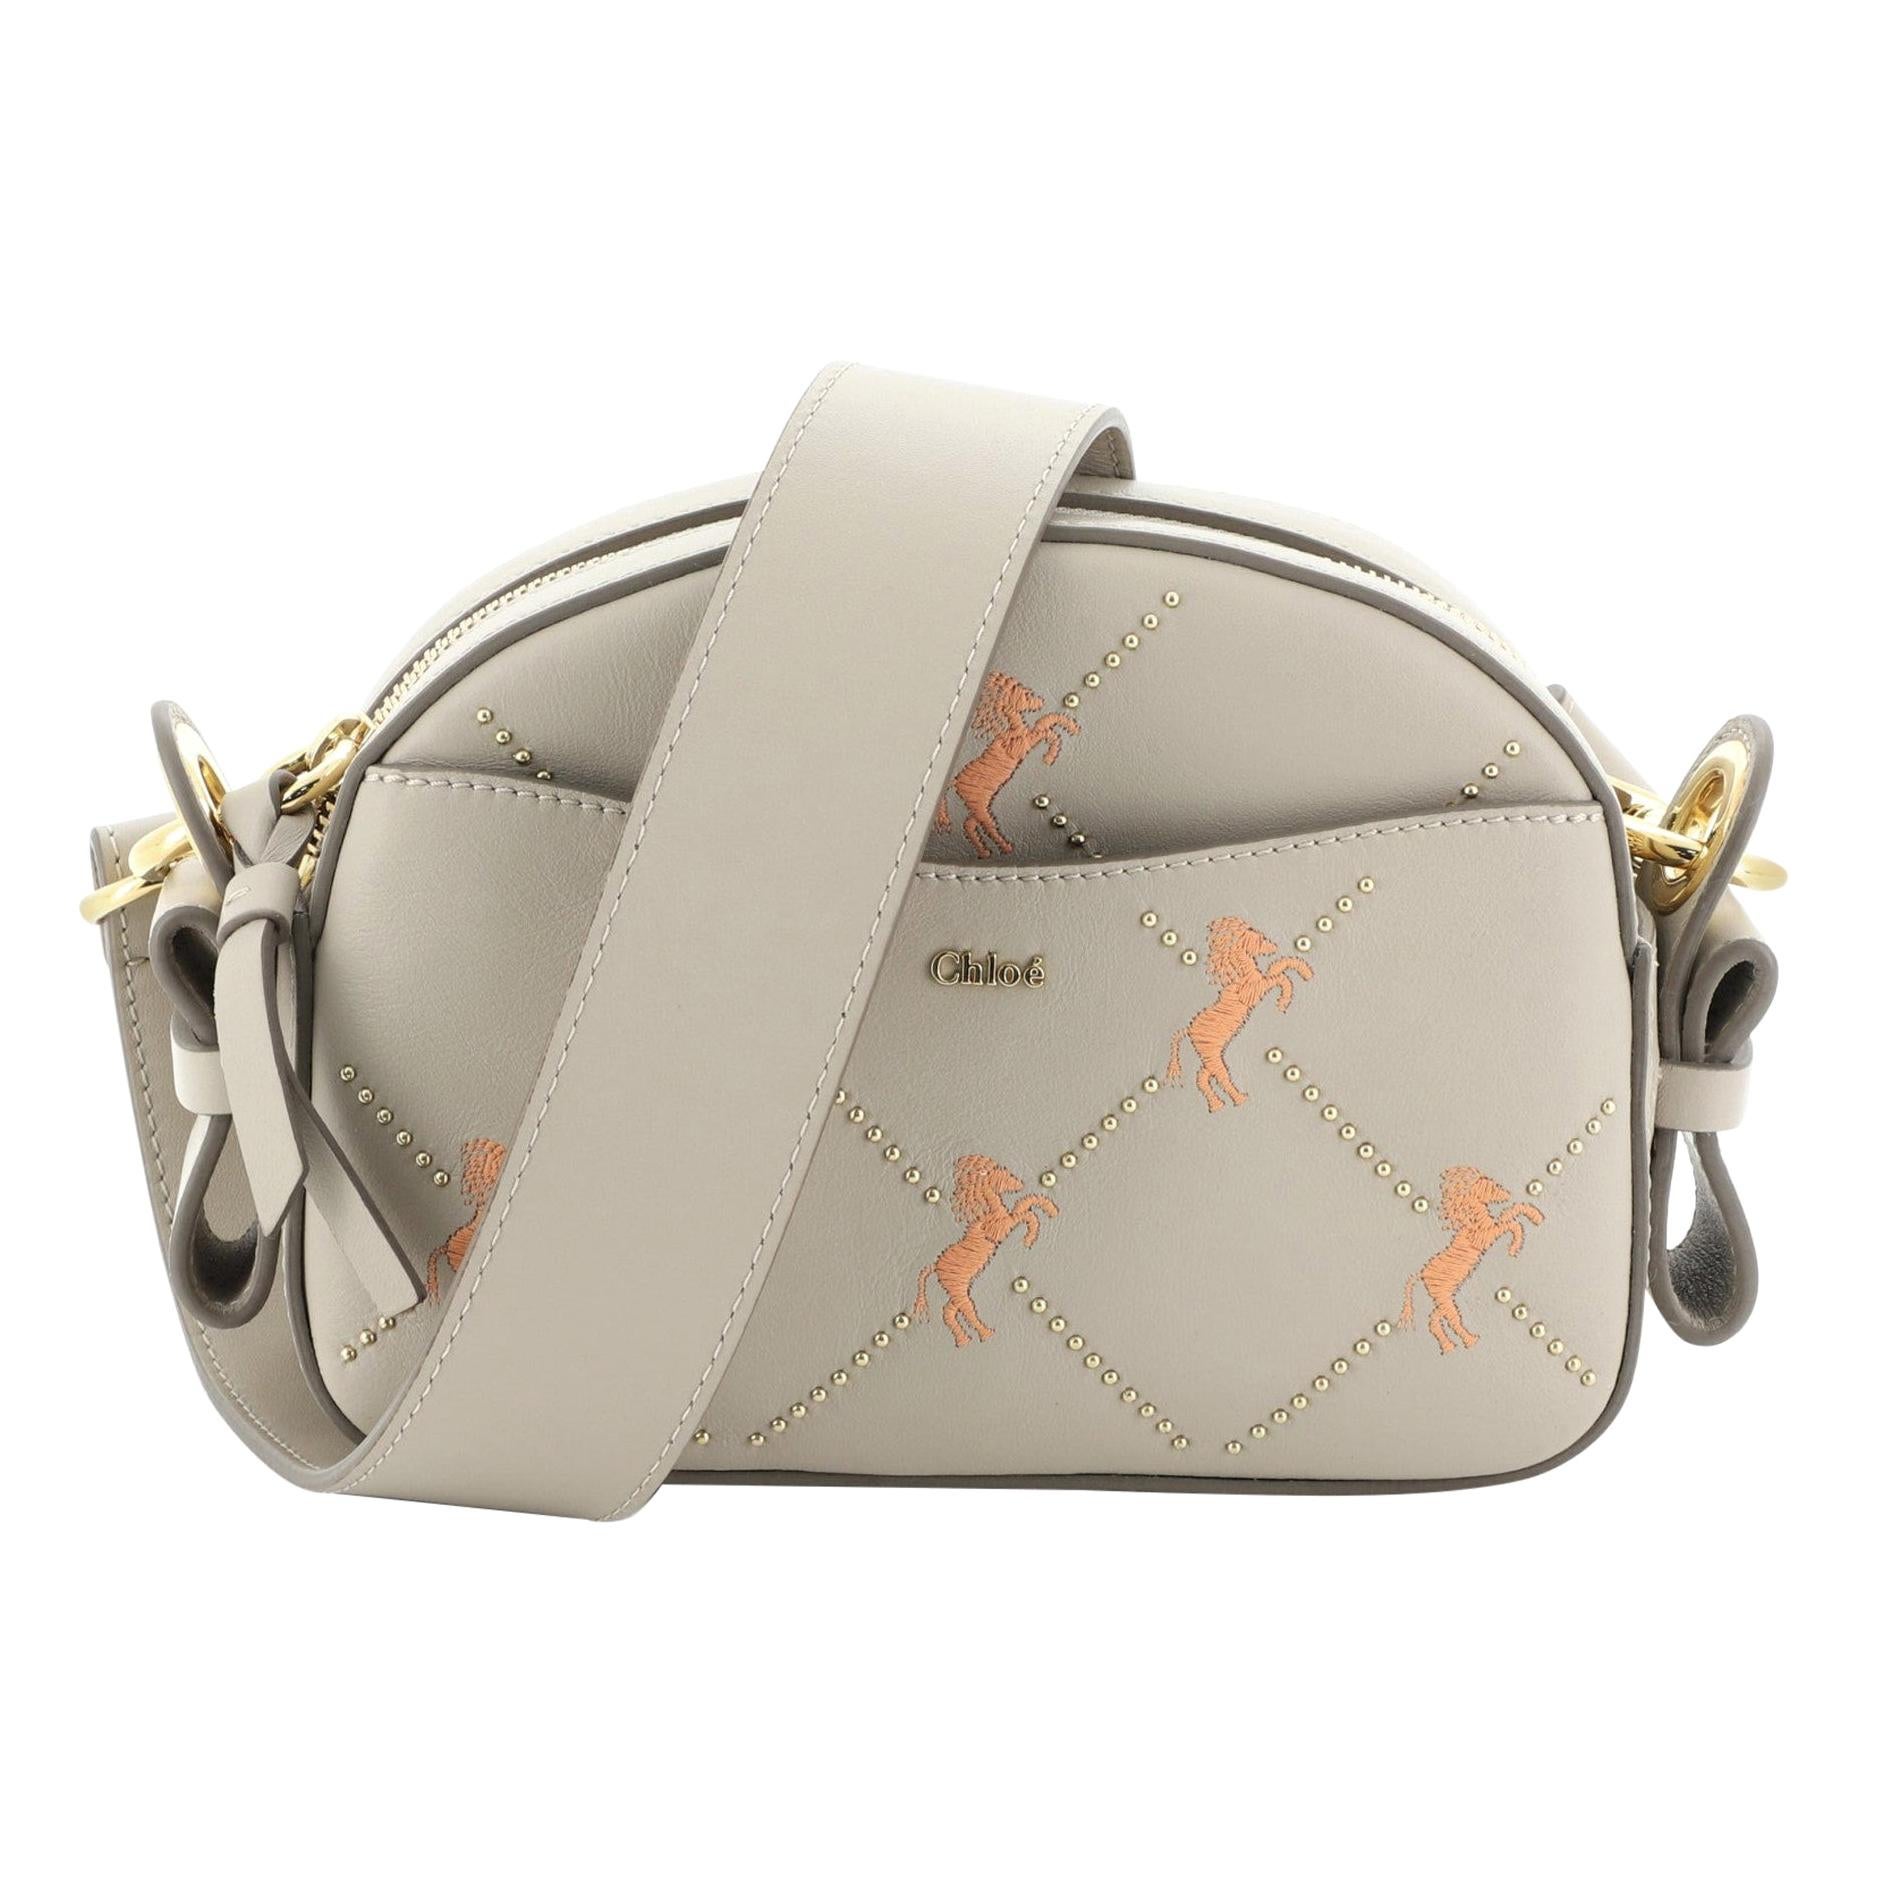 Chloe Dome Shoulder Bag Studded Embroidered Leather Small